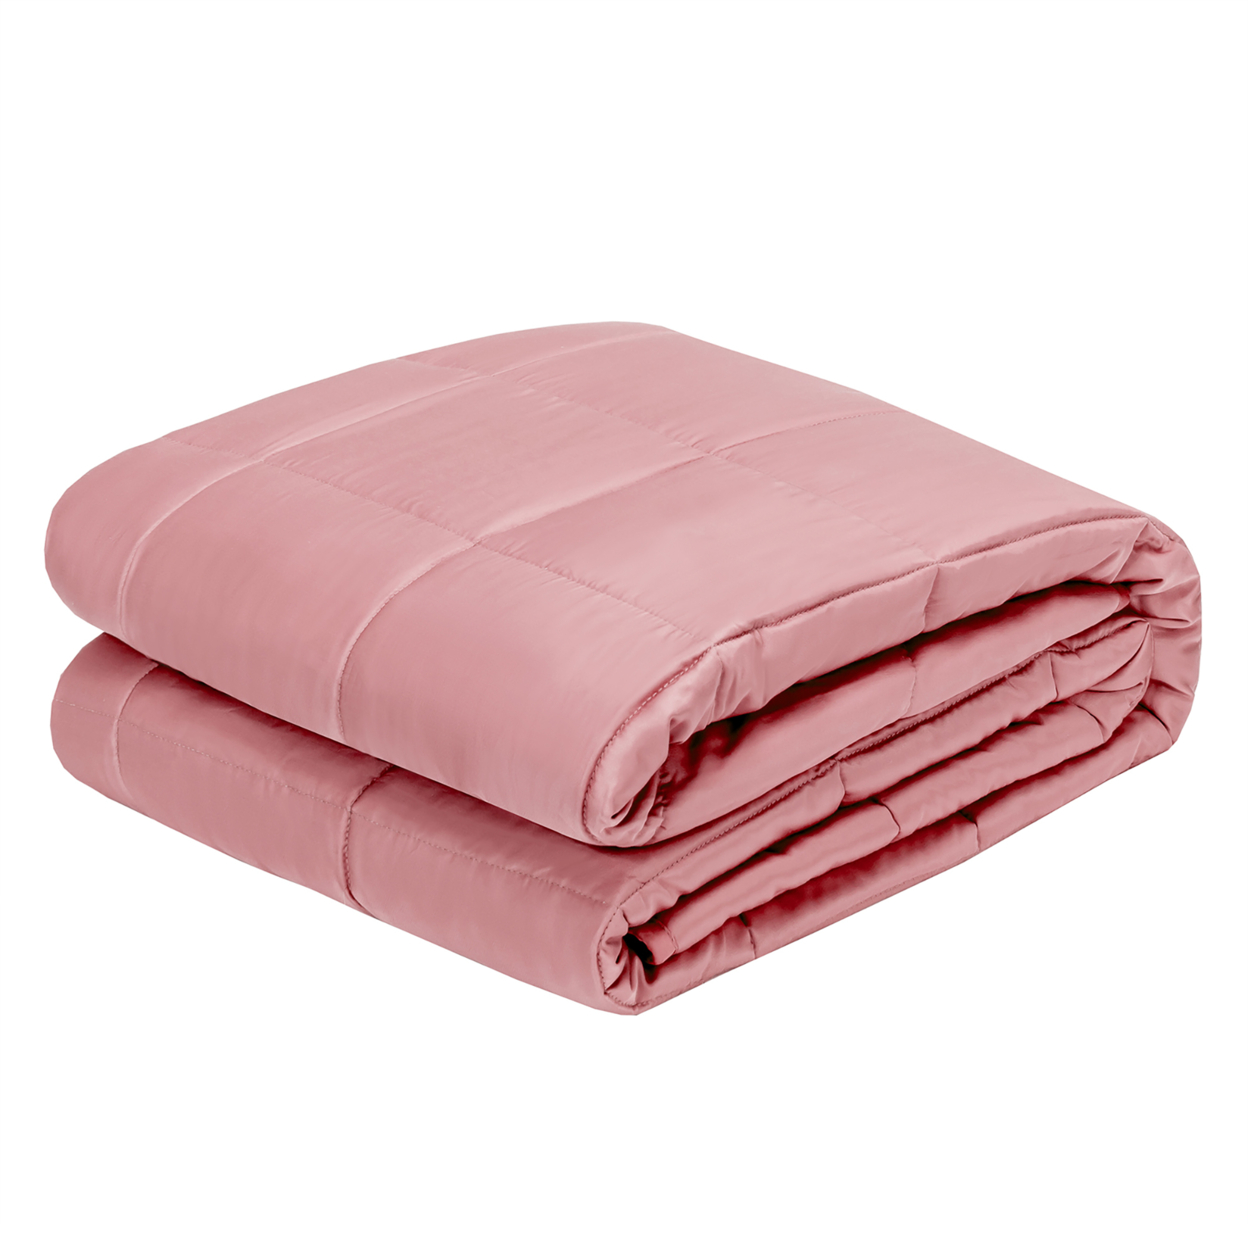 15lbs Heavy Weighted Blanket Soft Fabric Breathable 60''x80'' Pink\\Blue\\Green - Green